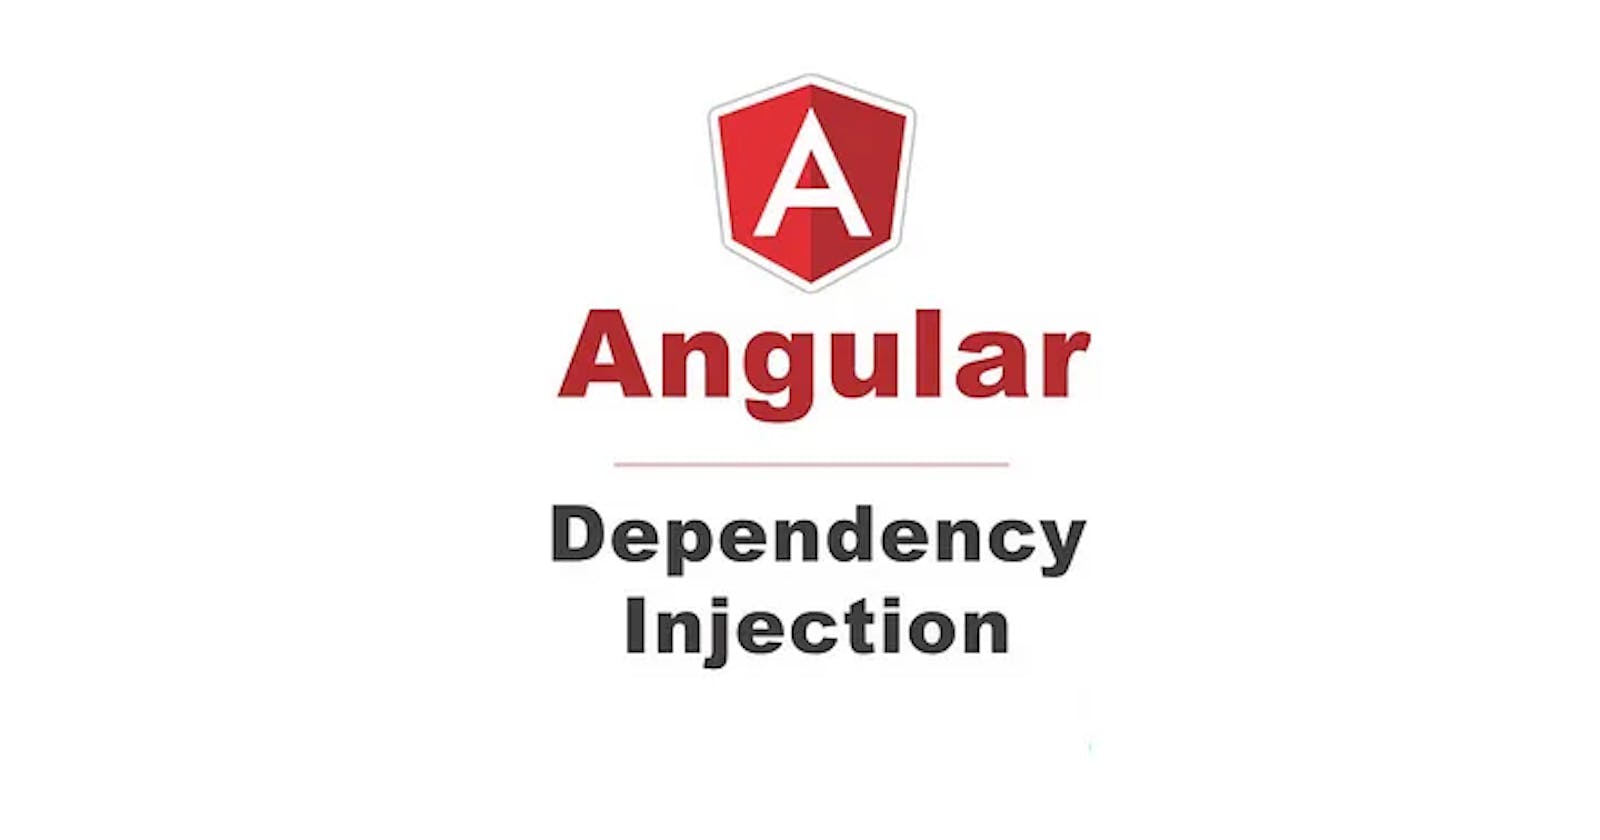 Angular Dependency Injection: A Beginner’s Guide